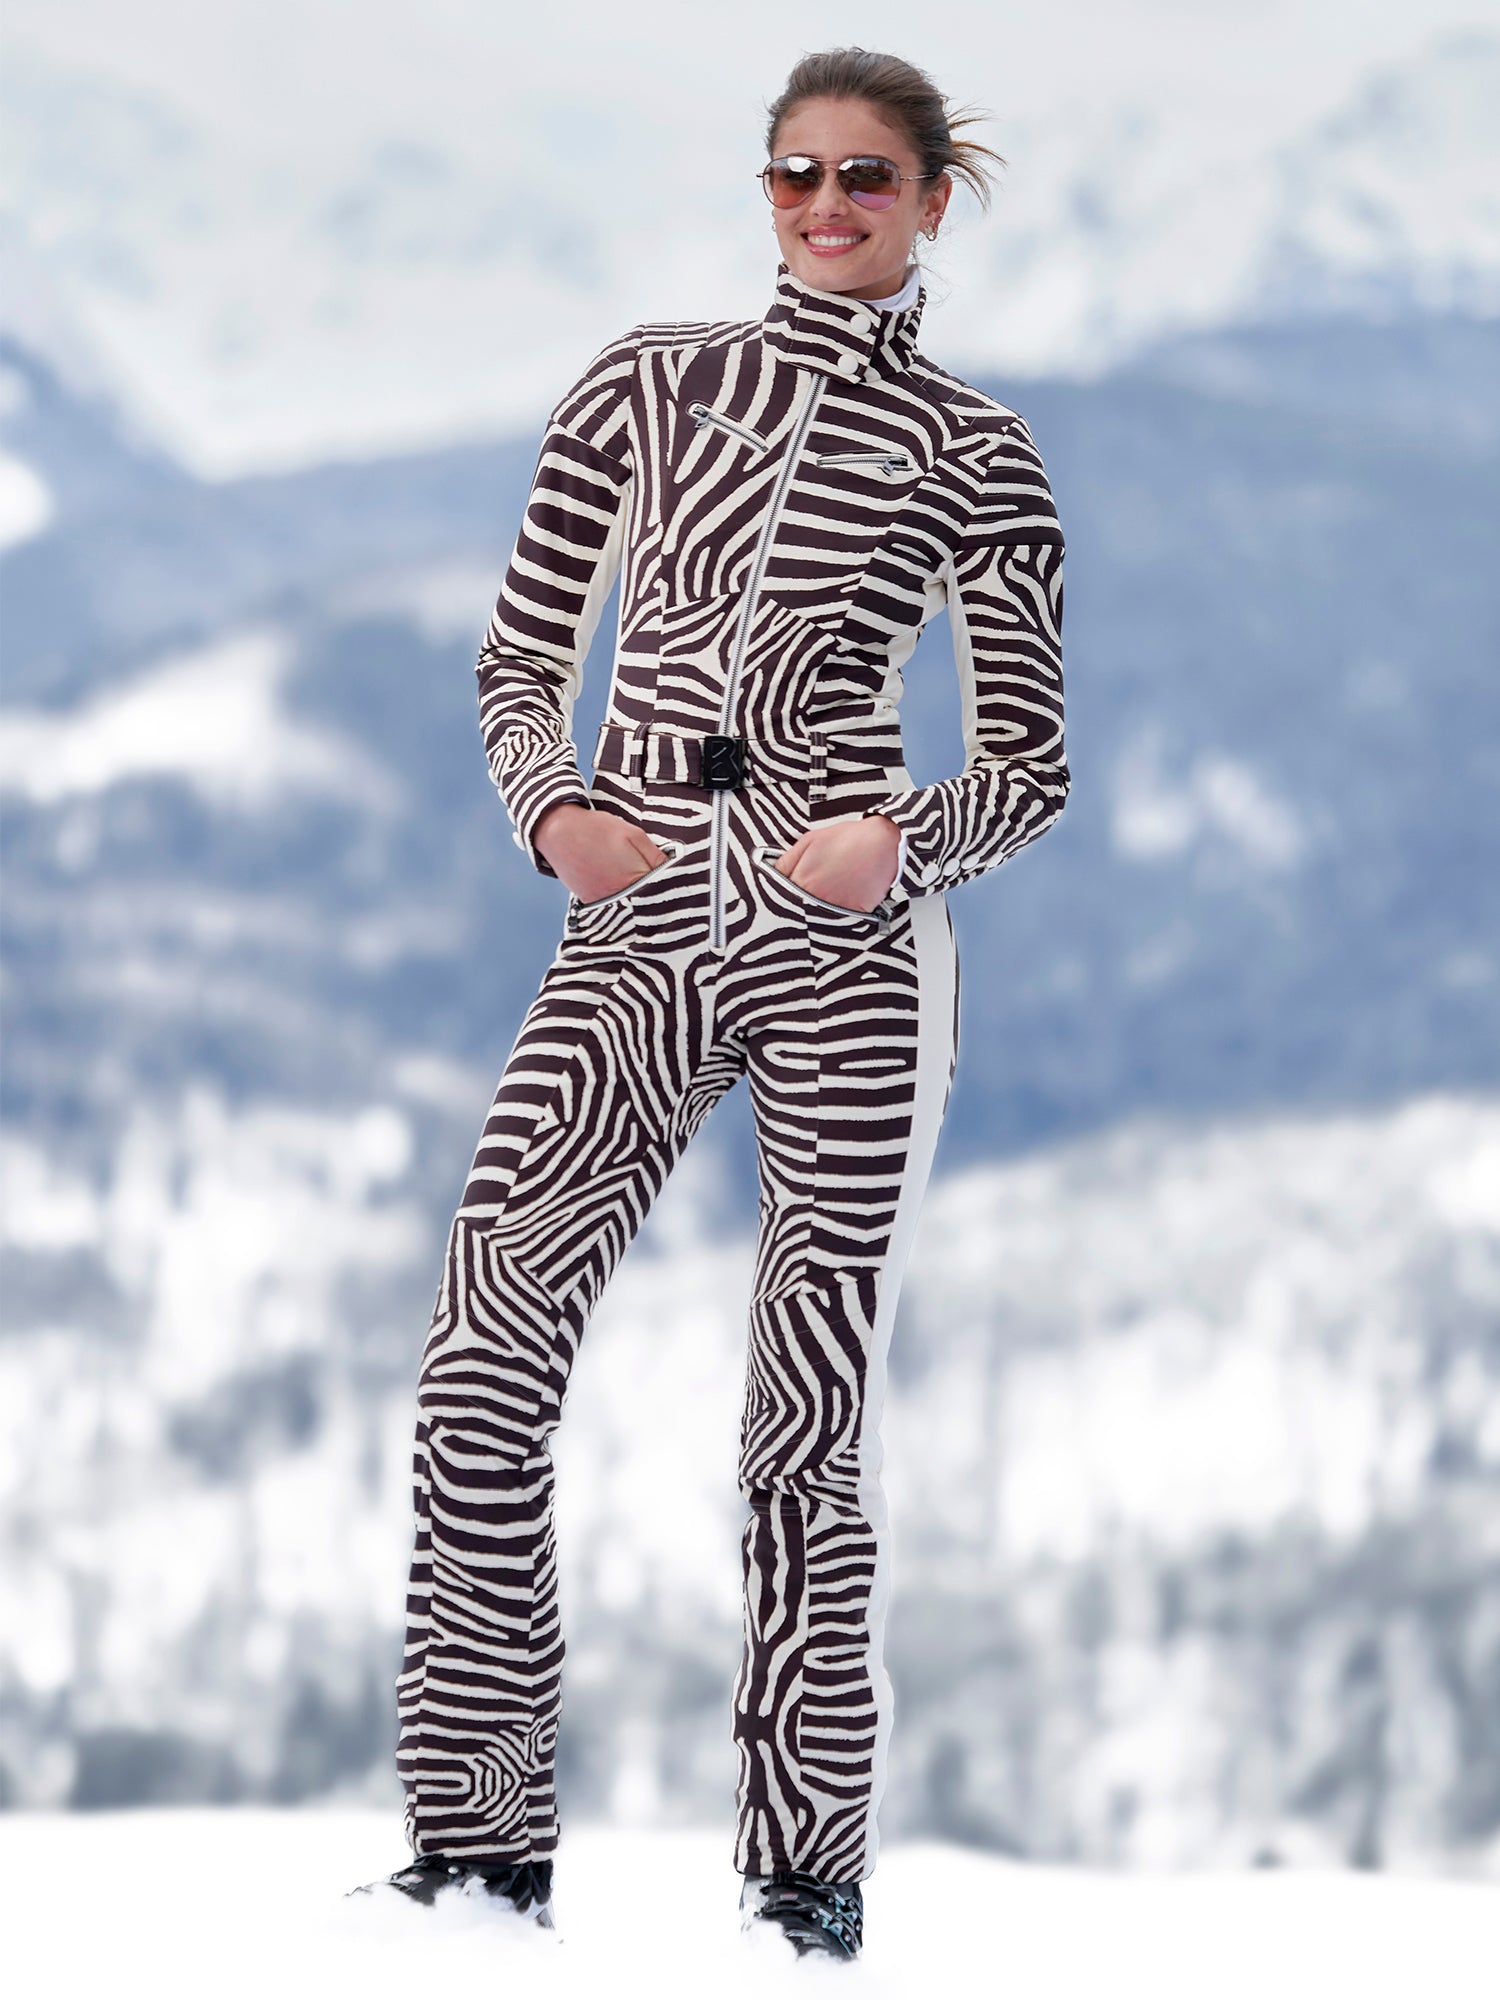 Cowgirl winter outfit snowsuit - BONA - CAPPUCCINO - Ski clothing